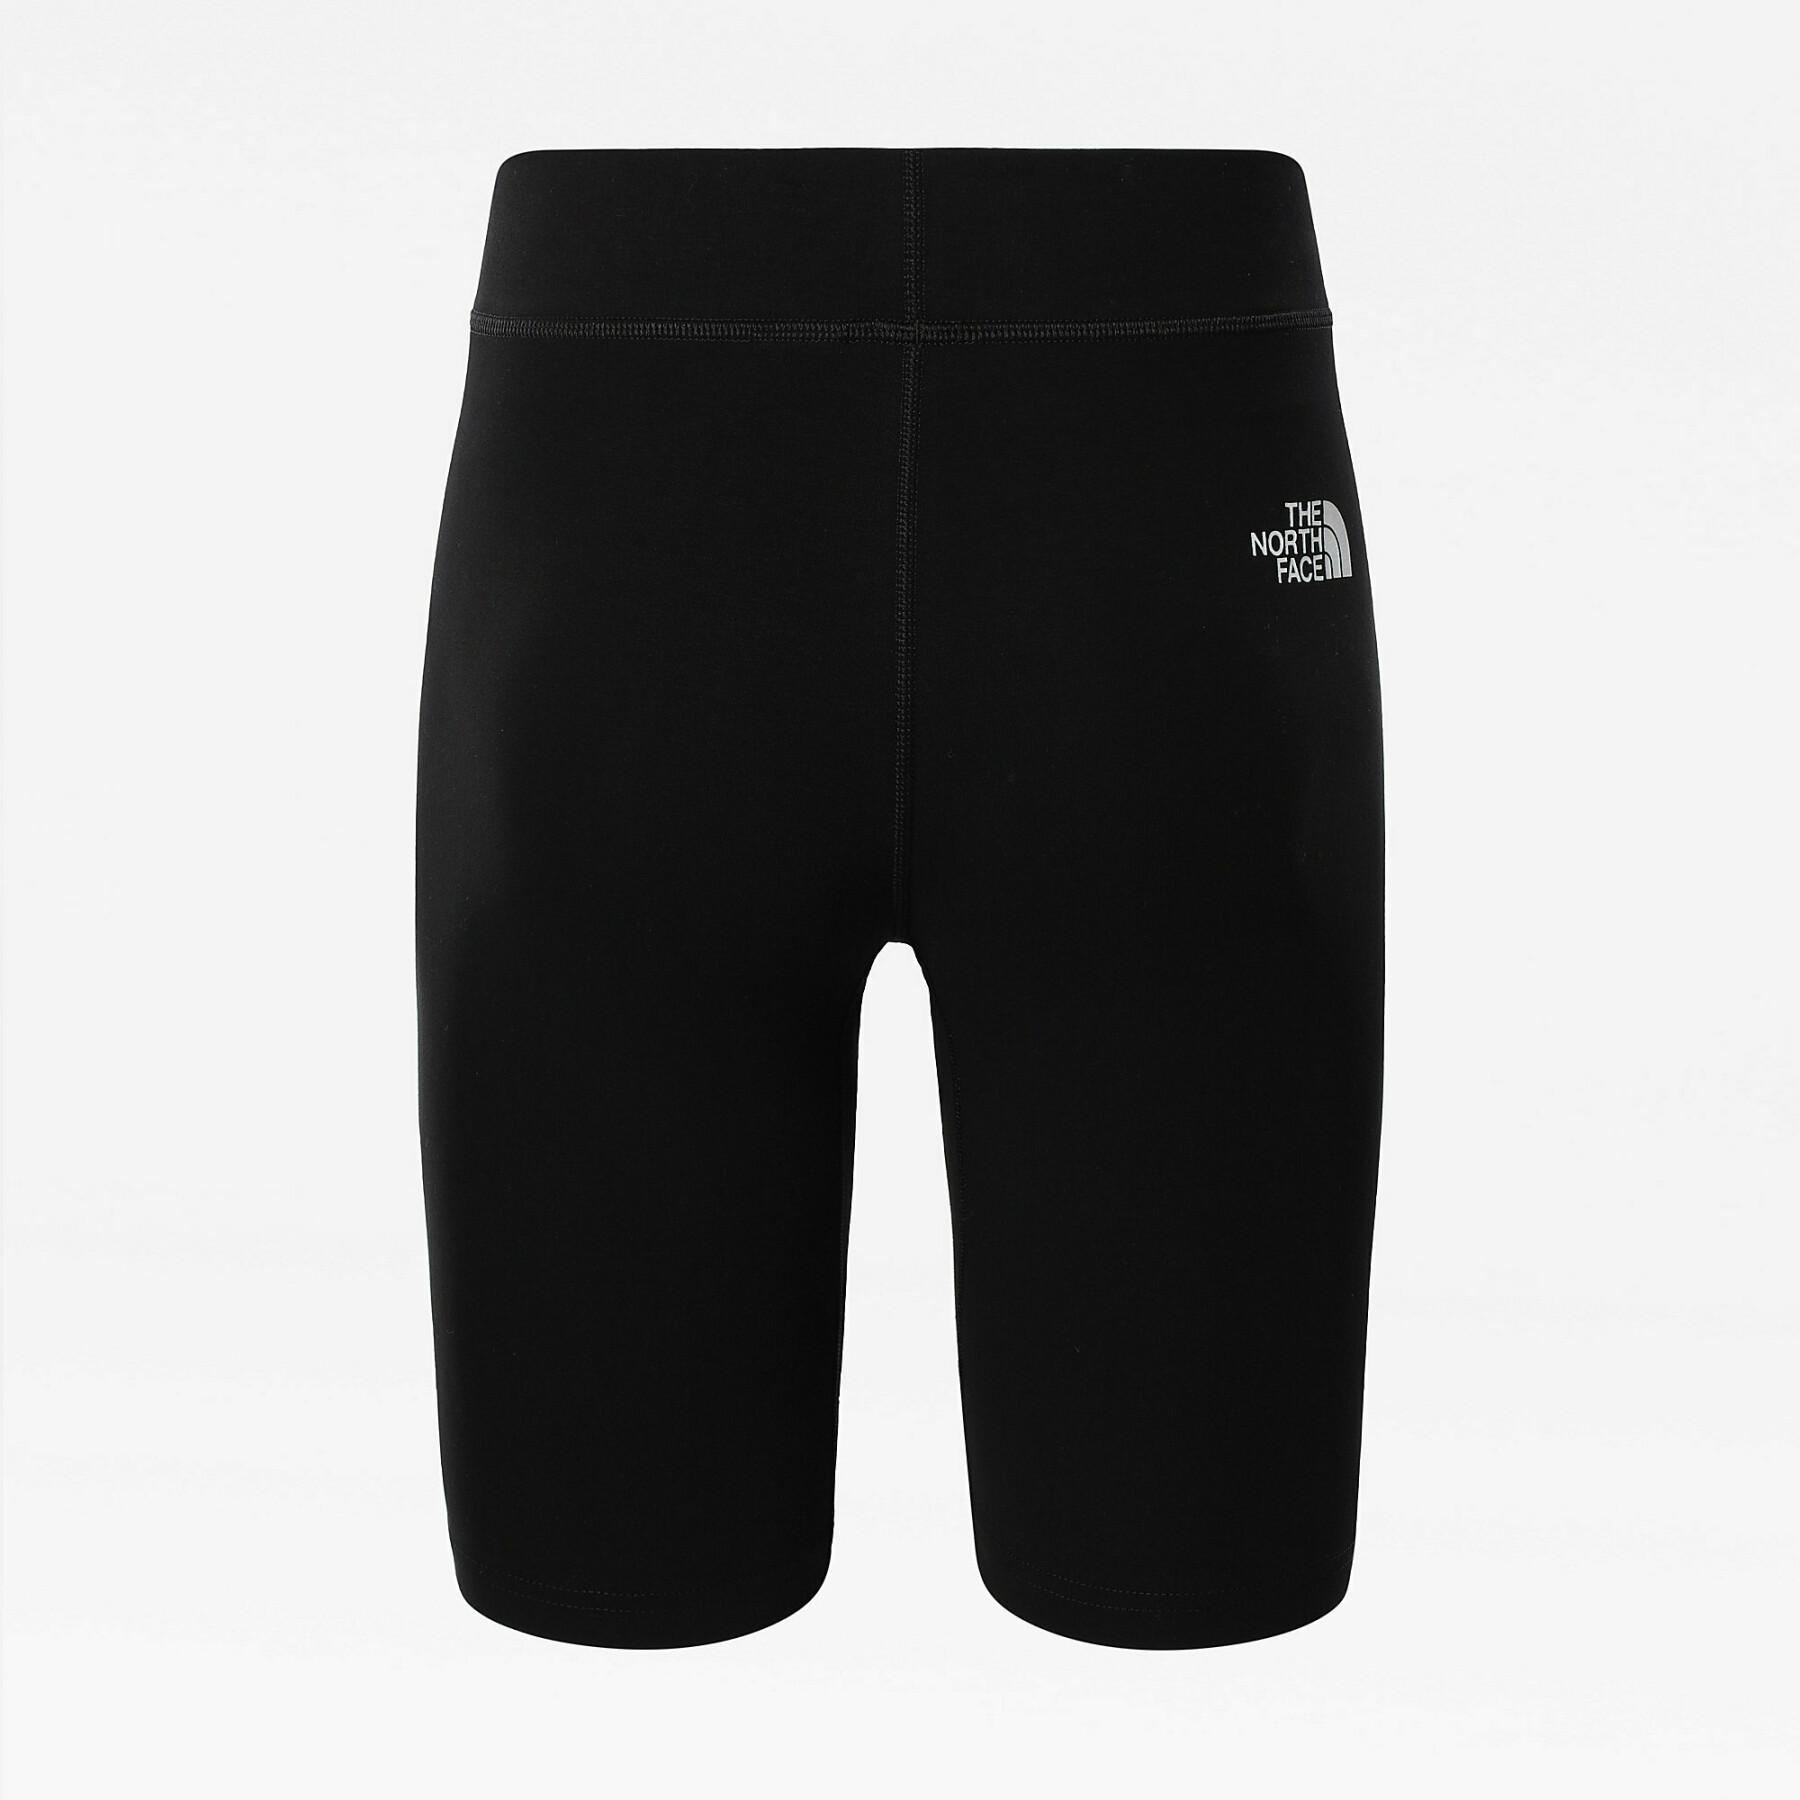 Women's cotton shorts The North Face